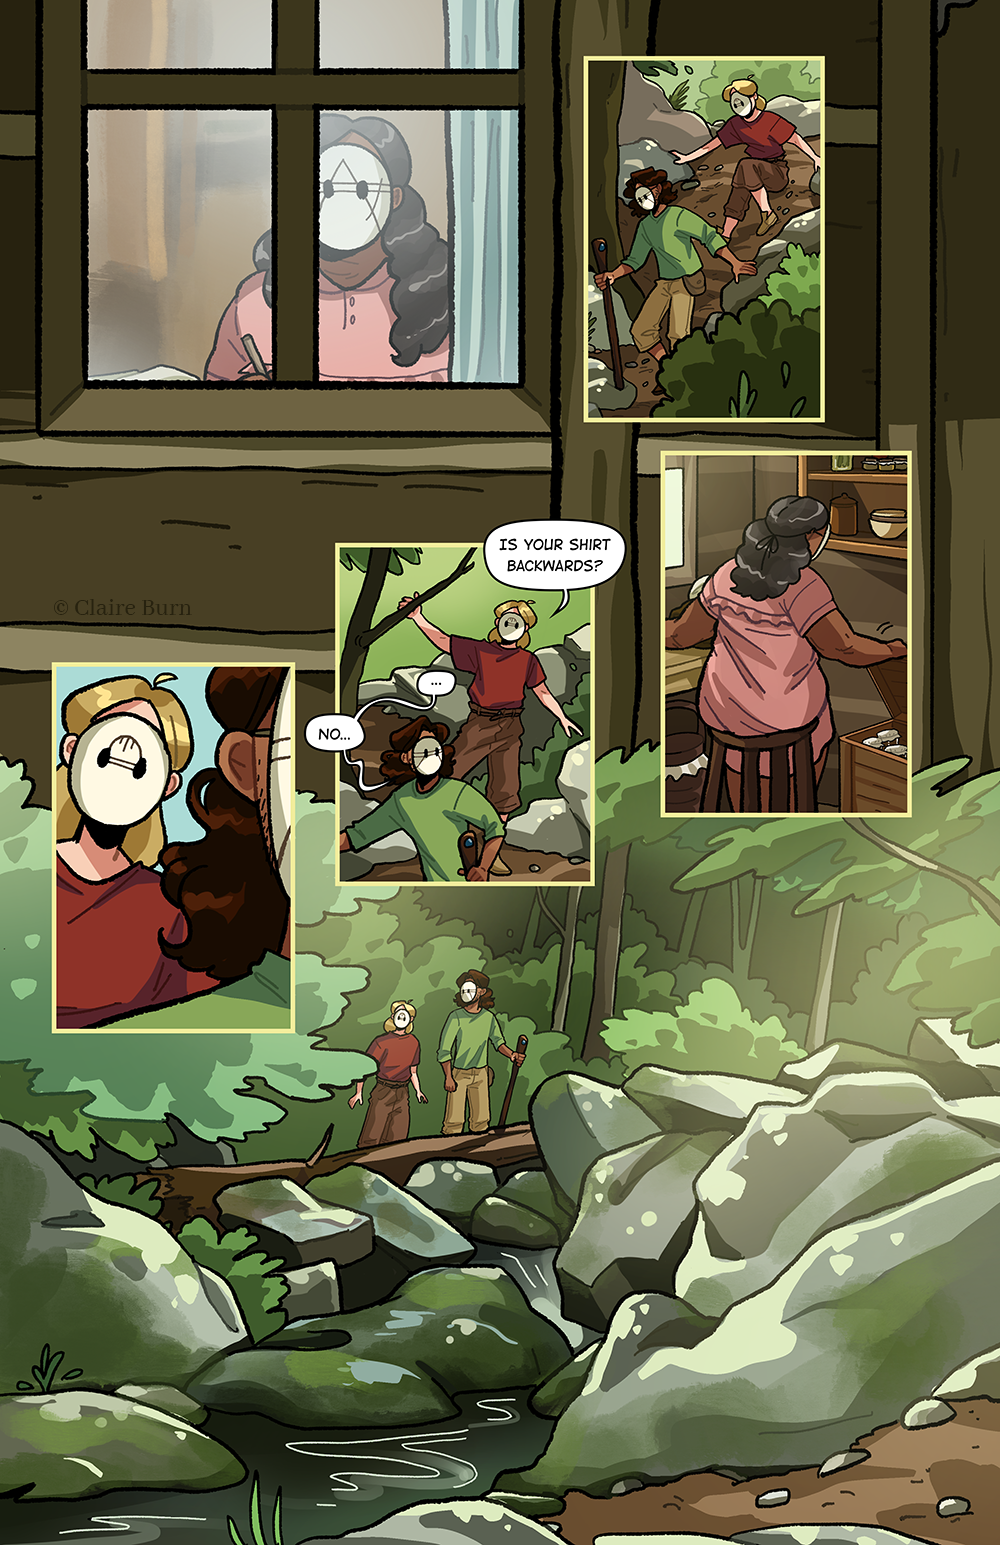 Zeporah watches Jon and Halla leave the house. They end up at a small rocky creek.